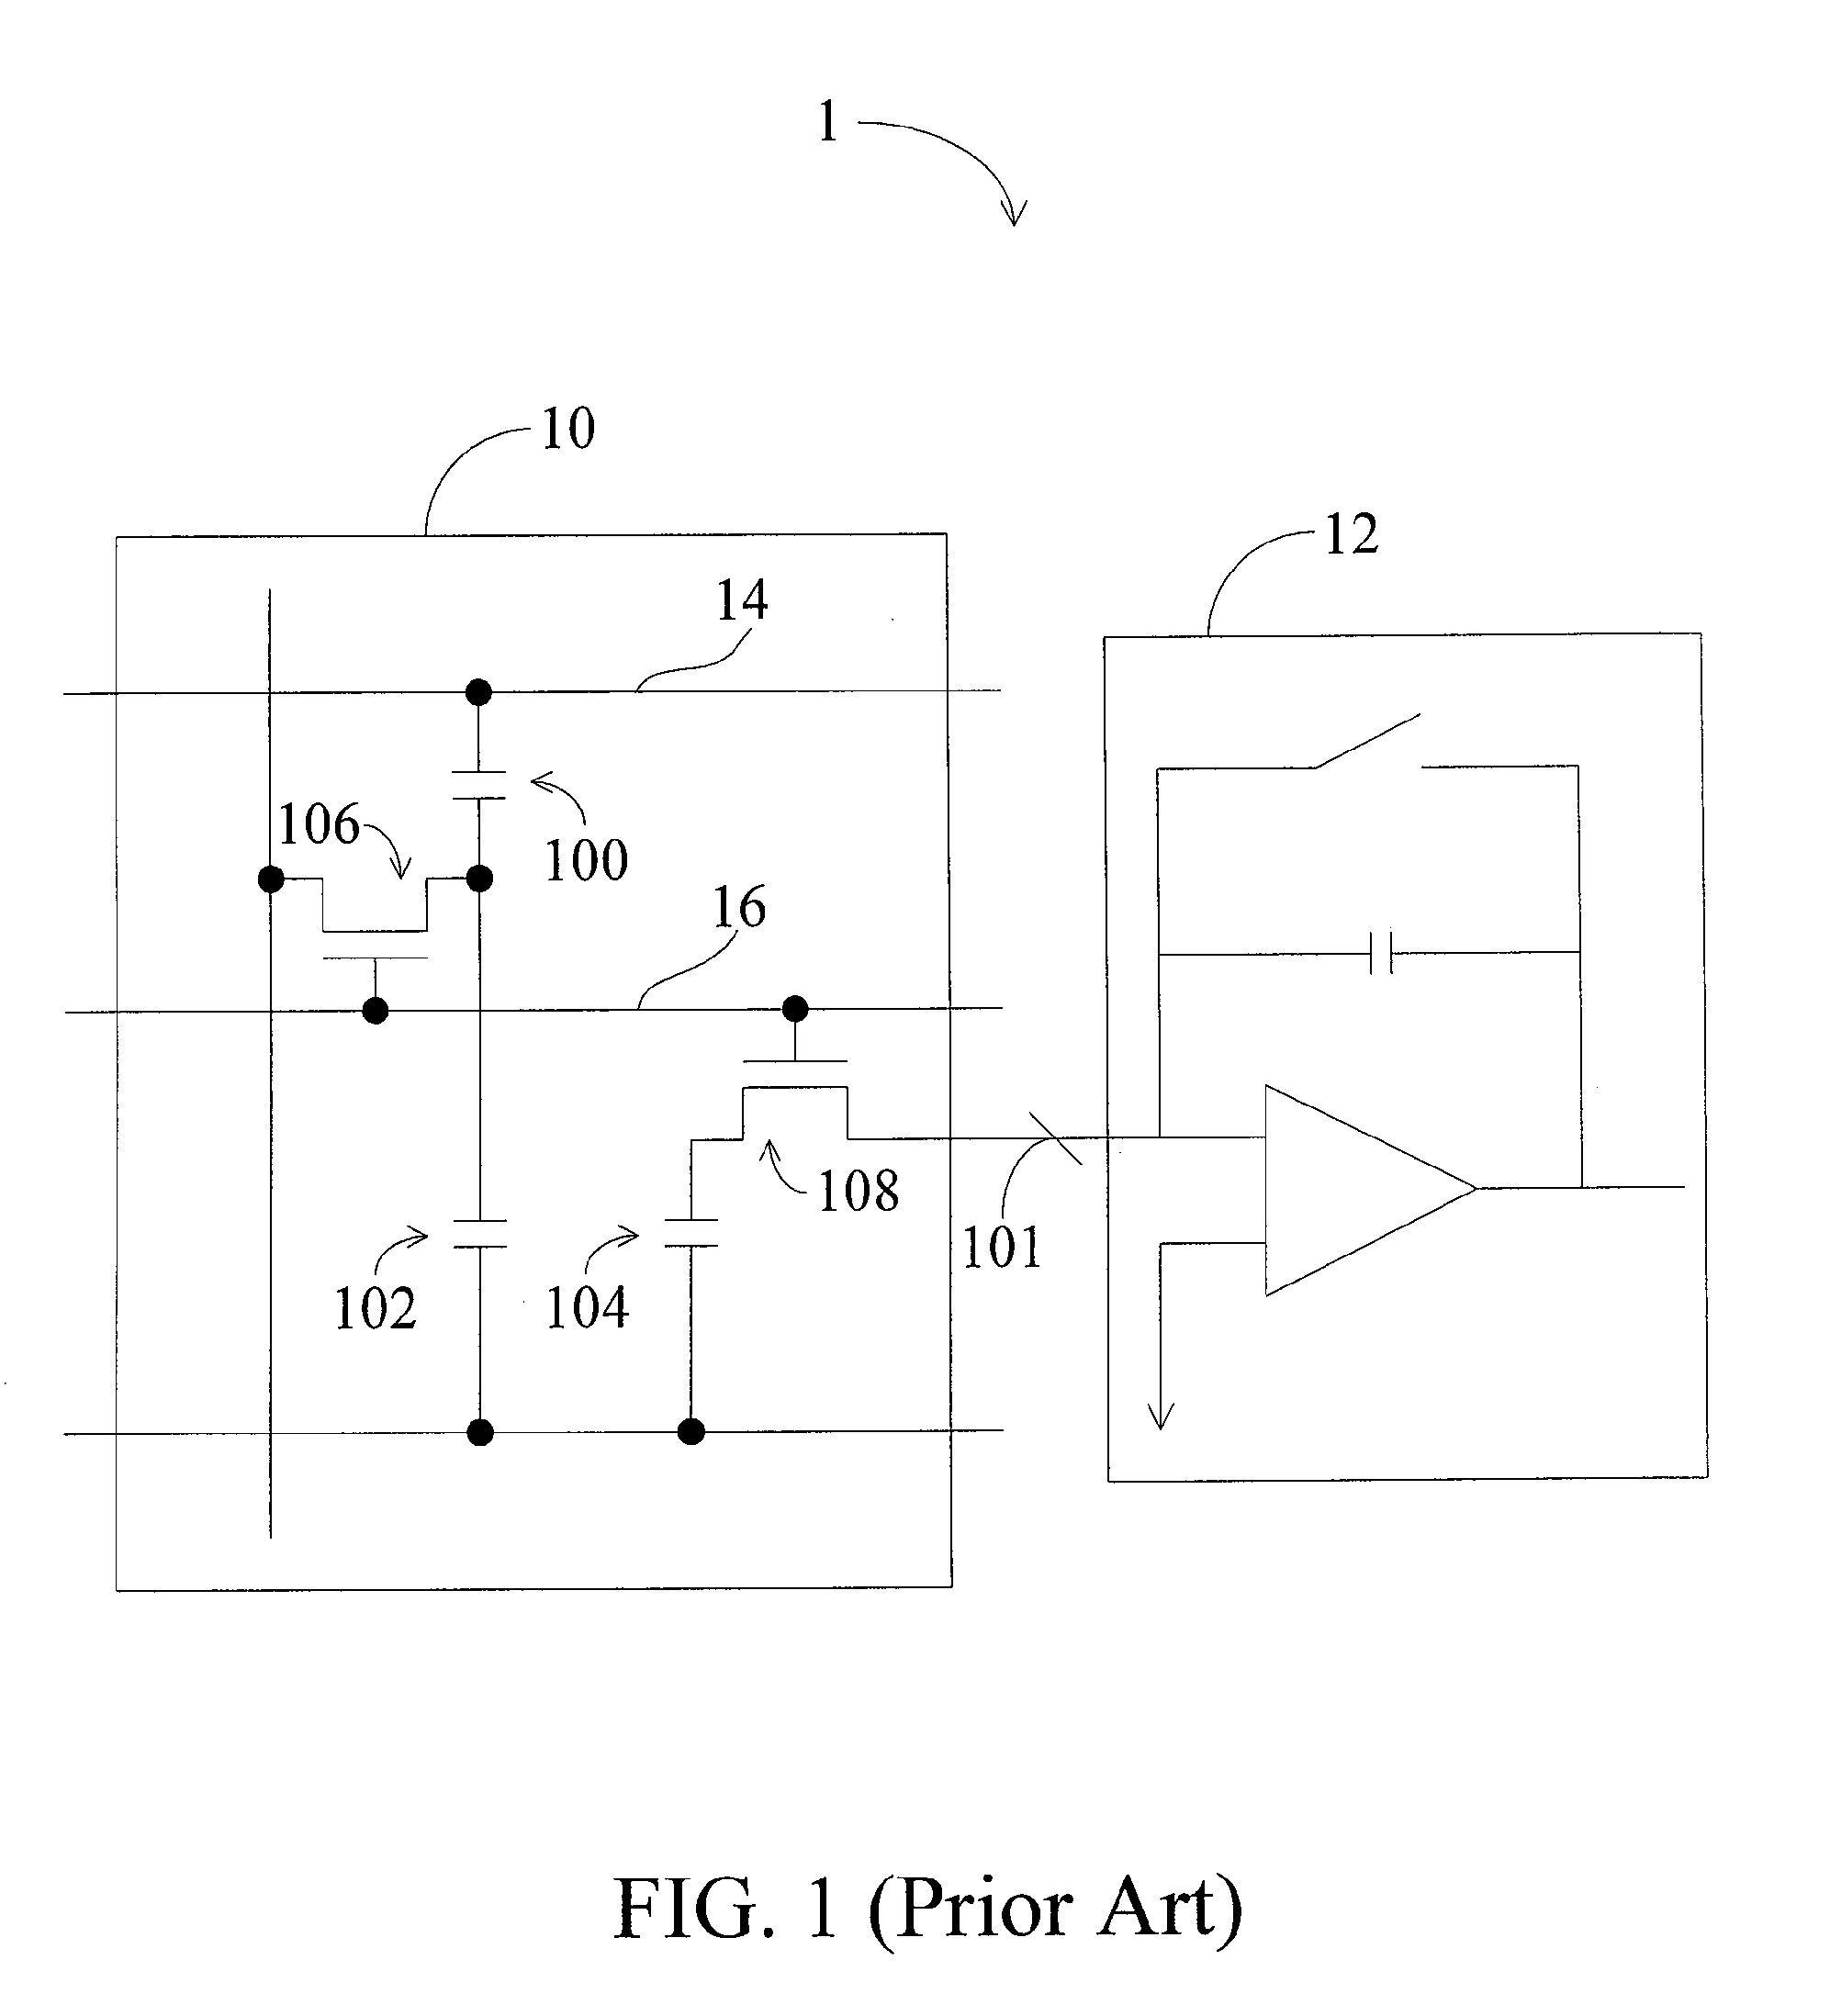 Pixel Unit, Method for Sensing Touch of an Object, and Display Apparatus Incorporating the Same